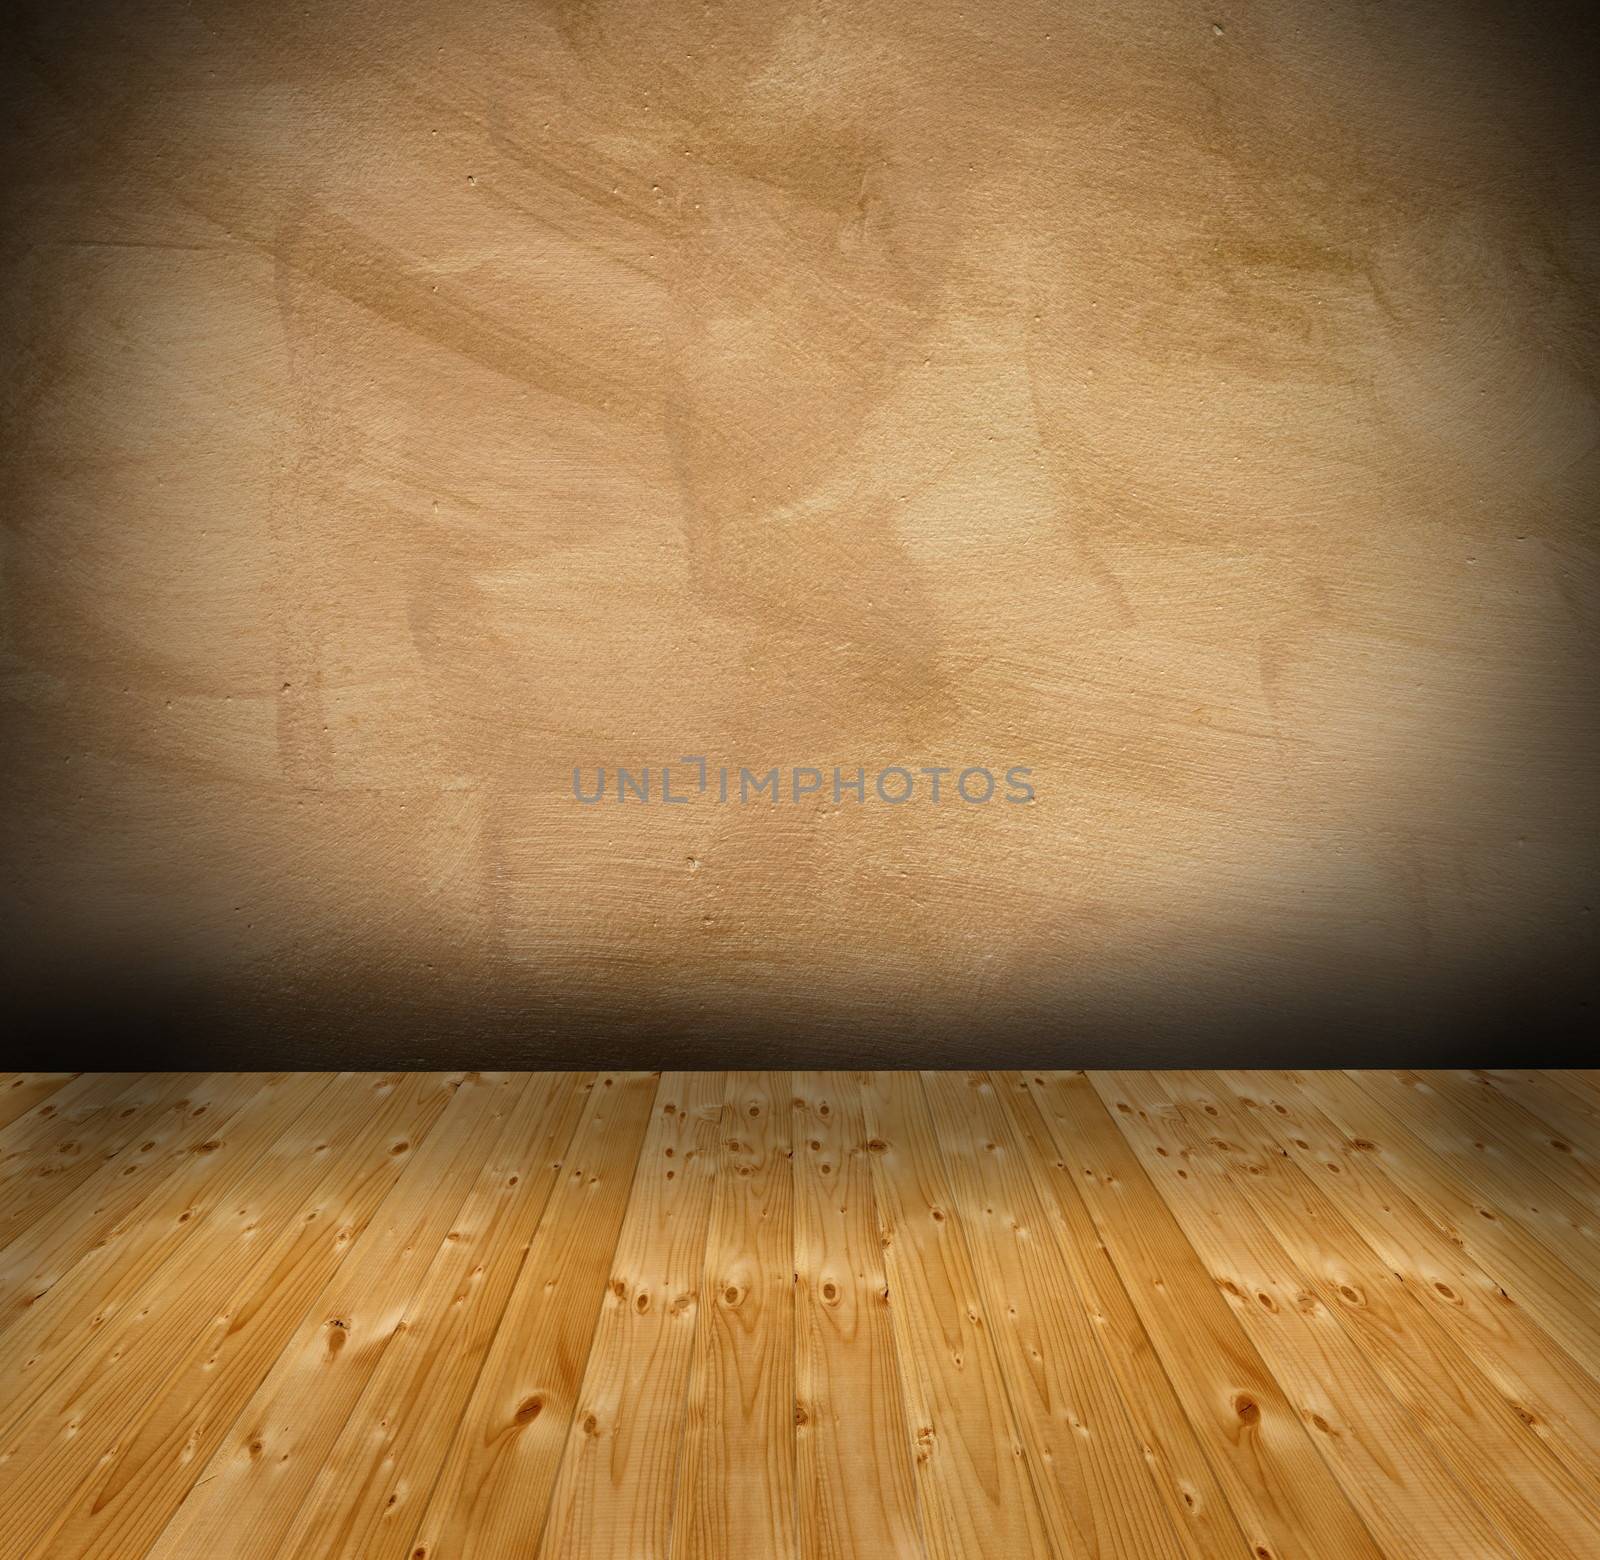 empty architectural background - interior with wooden floor and grungy wall with vignette